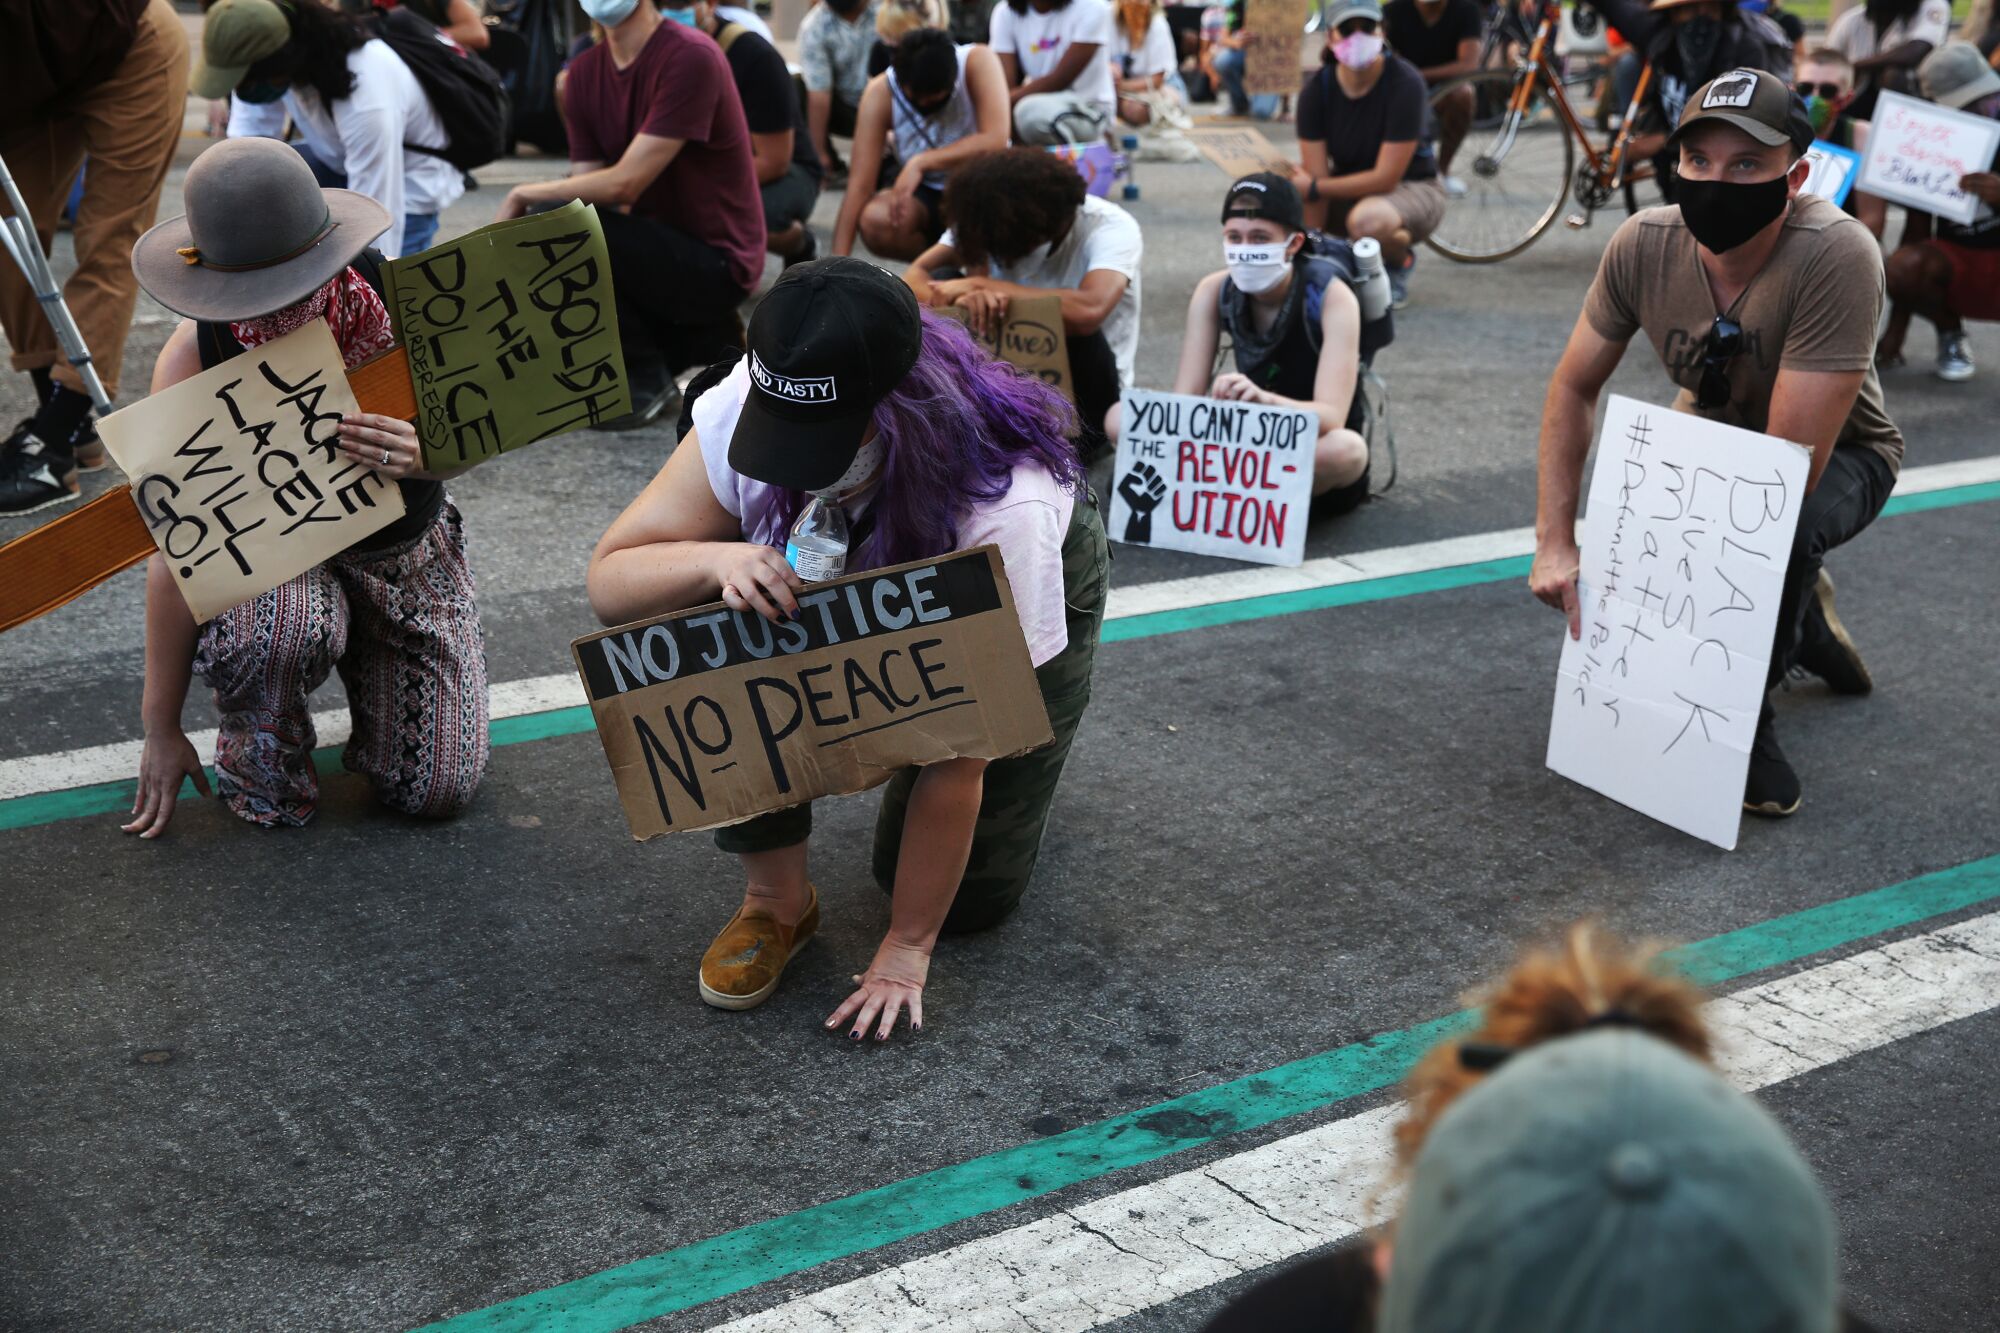 People take a knee to touch the ground during a Black Lives Matter Los Angeles and Build Power gathering in downtown L.A.